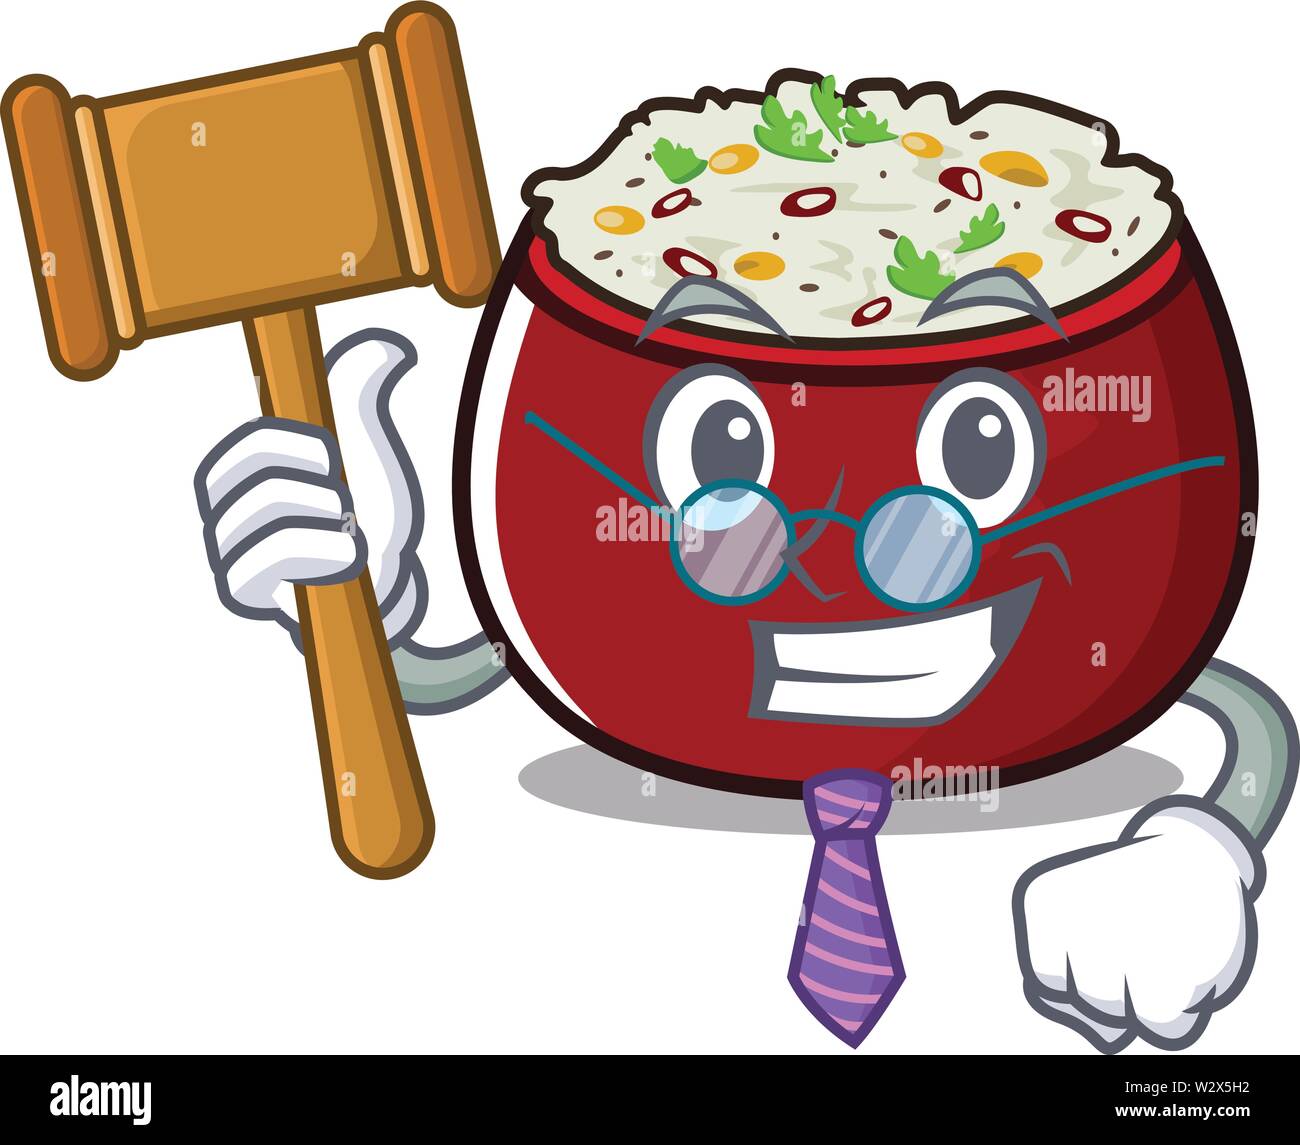 Judge curd rice placed on character plate Stock Vector